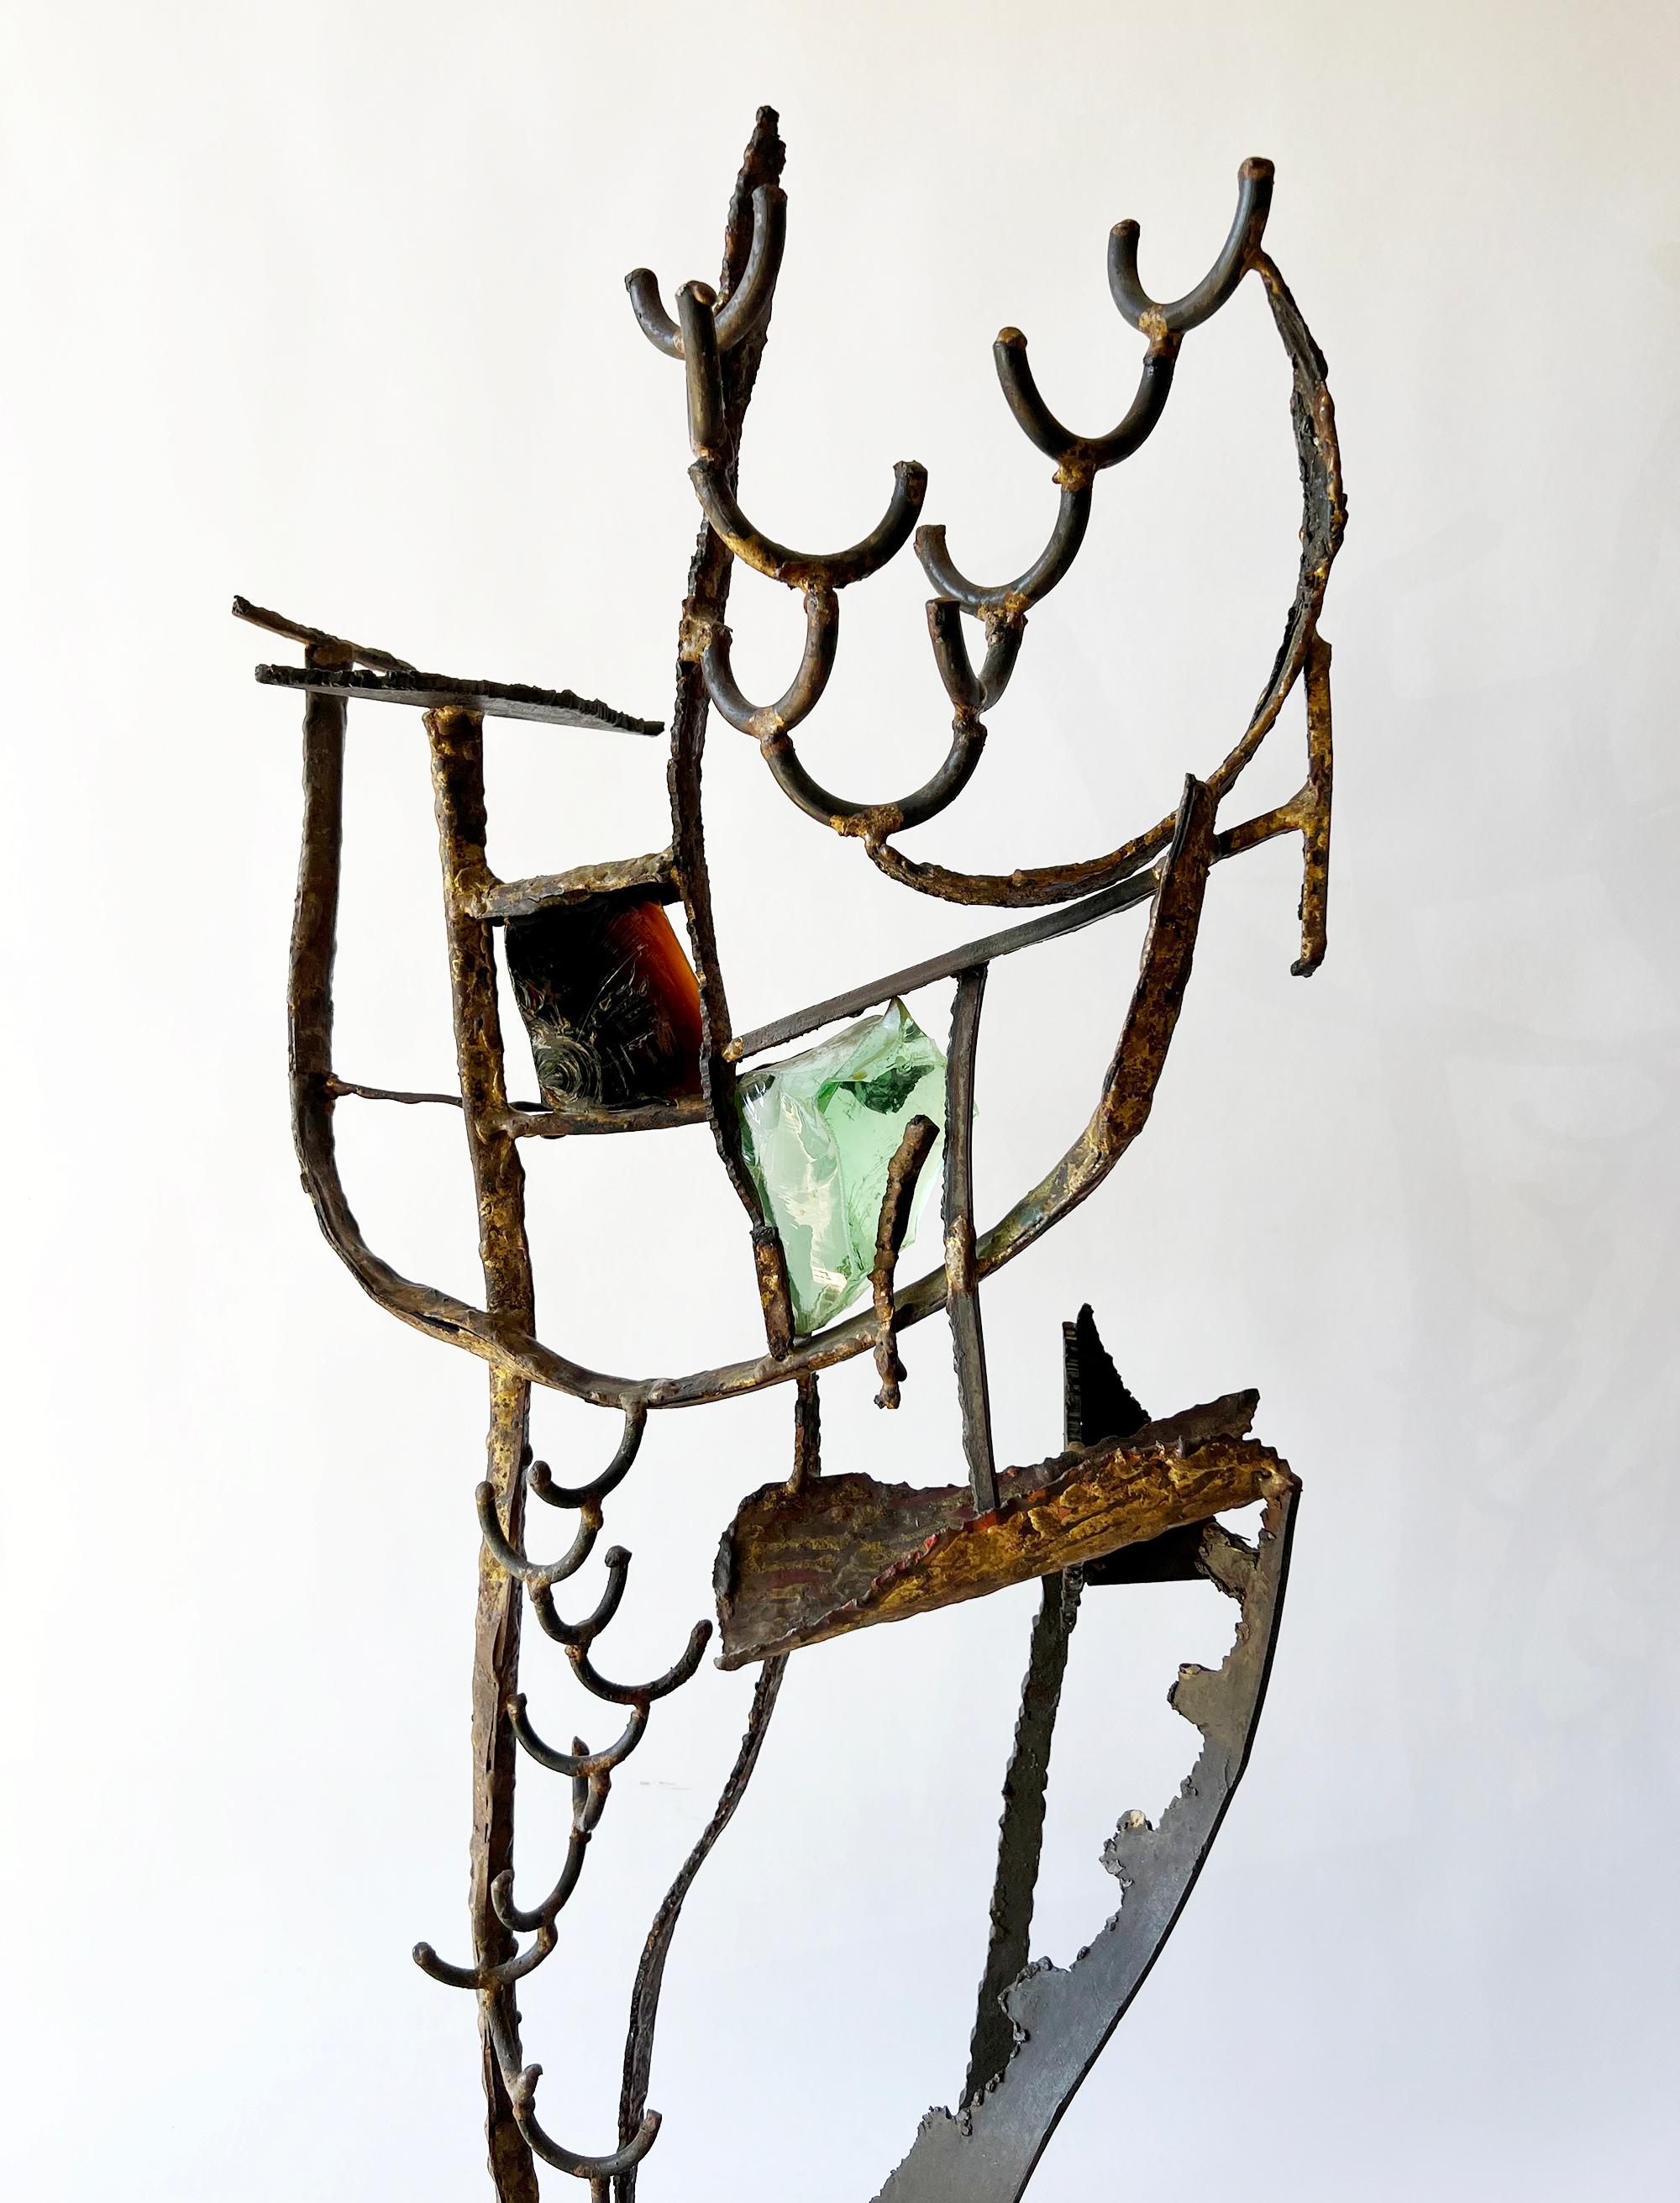 Handmade iron and glass sculpture with bronze soldering created by Leon Saulter of Los Angeles, circa 1958.  Sculpture measures 32